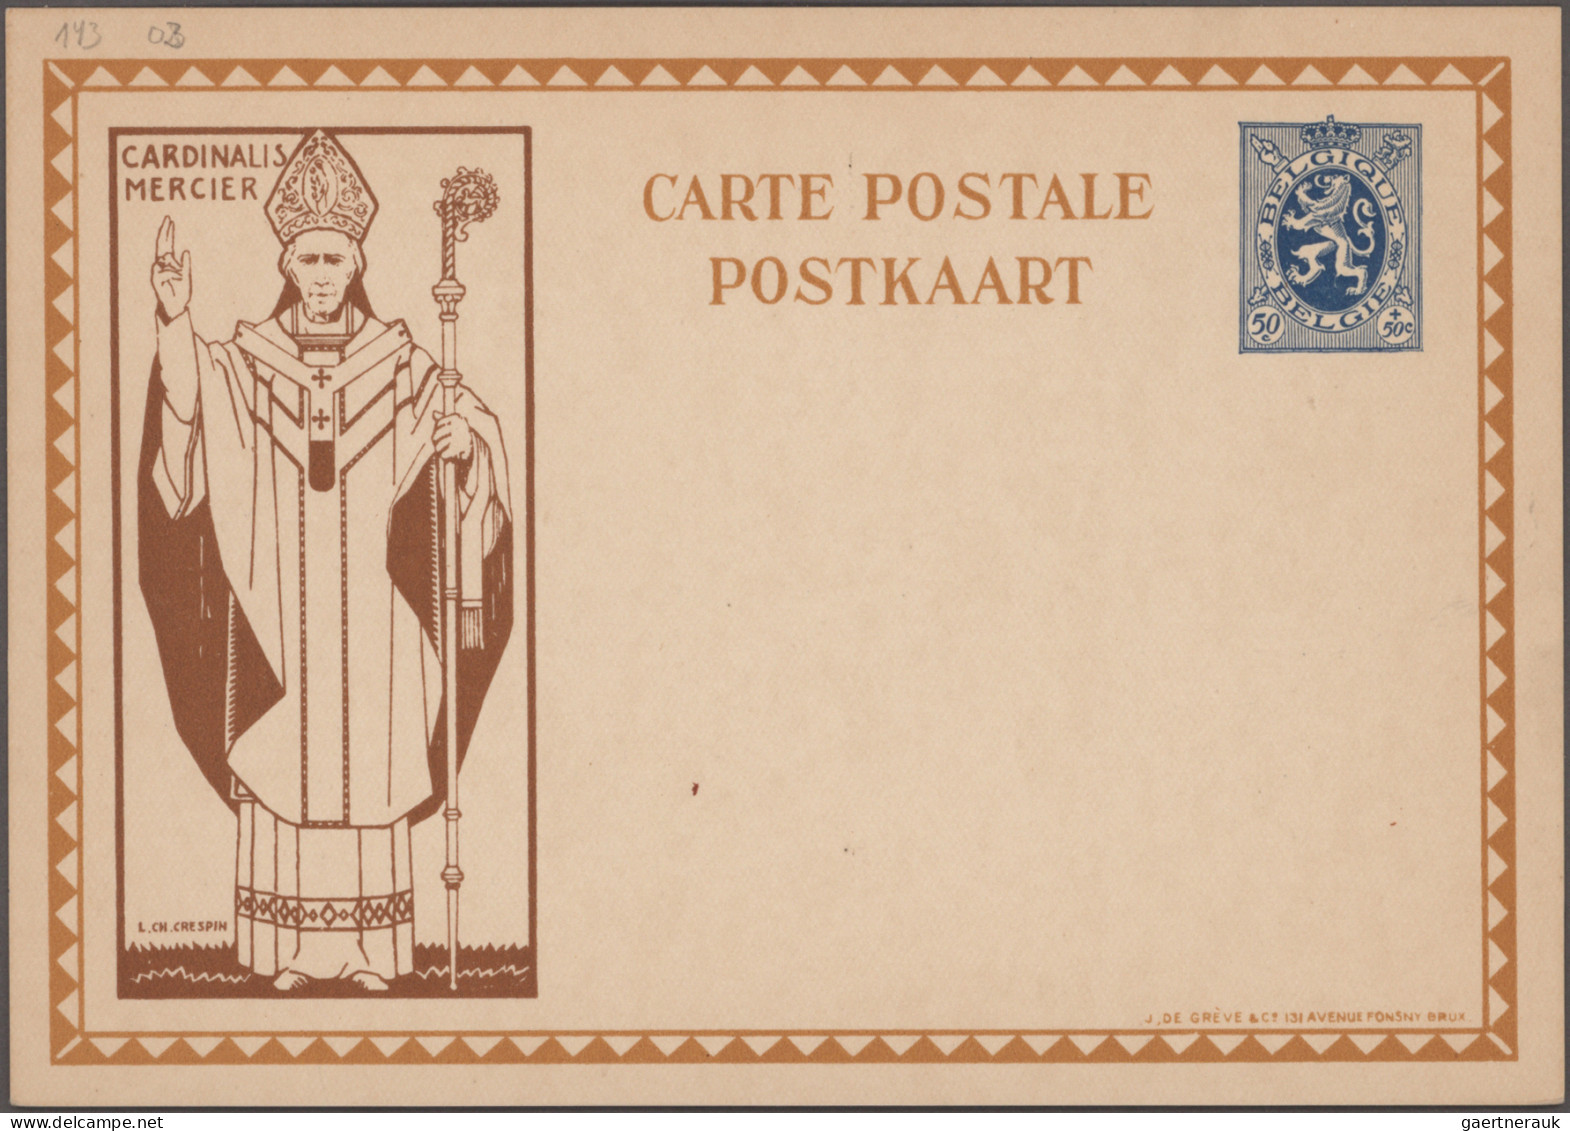 Belgium - postal stationery: 1900/1972, Pictorial/Advertising cards, assortment